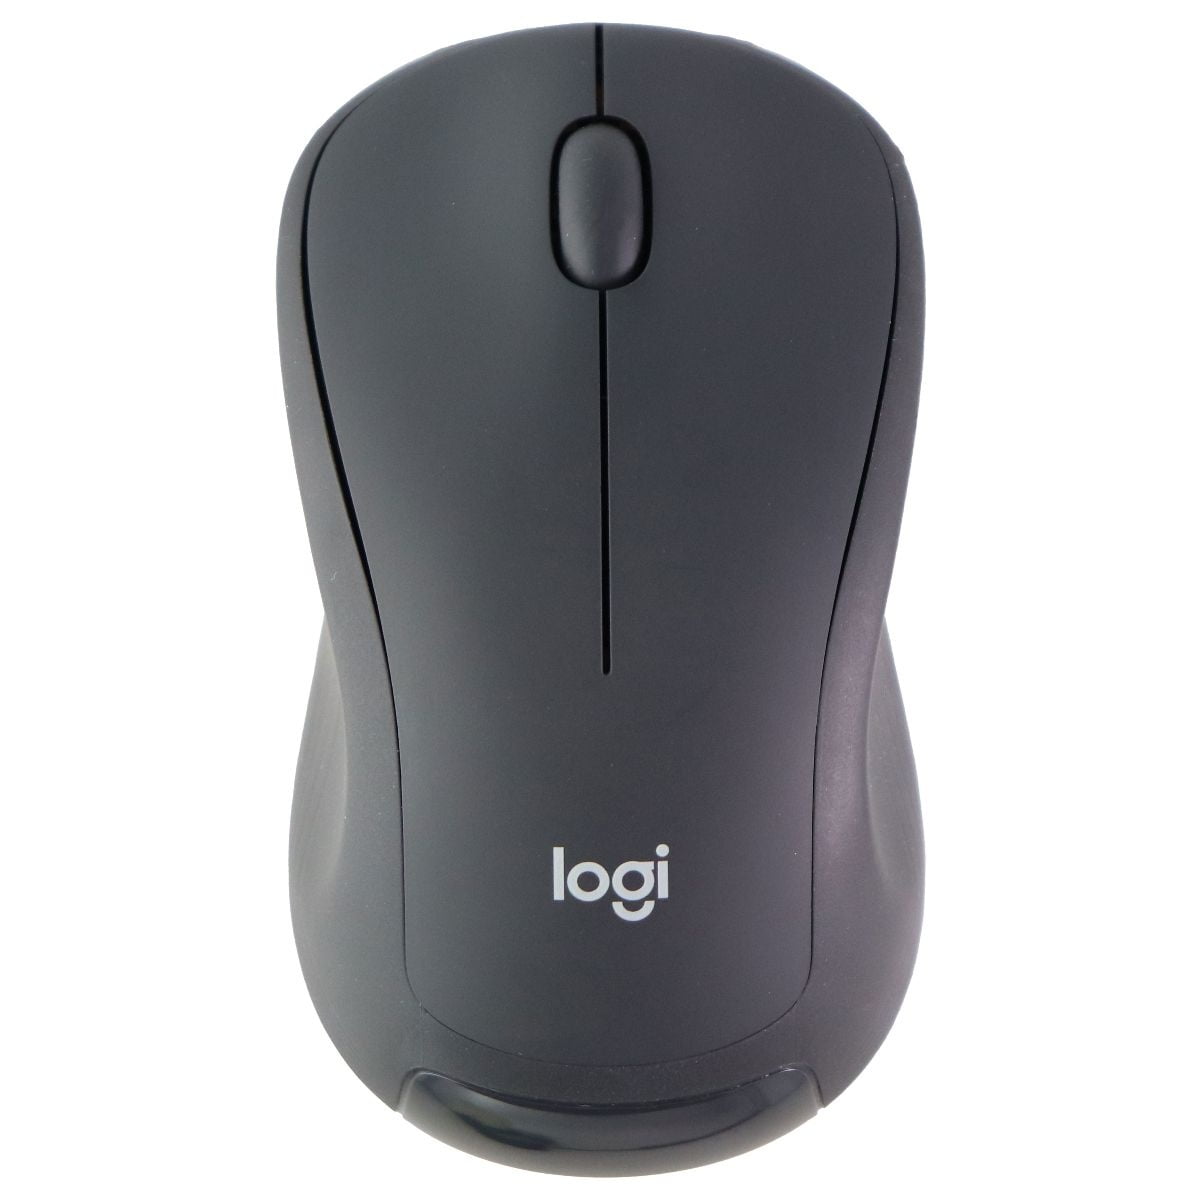 logitech-m310-wireless-mouse-with-dongle-dark-gray-refurbished